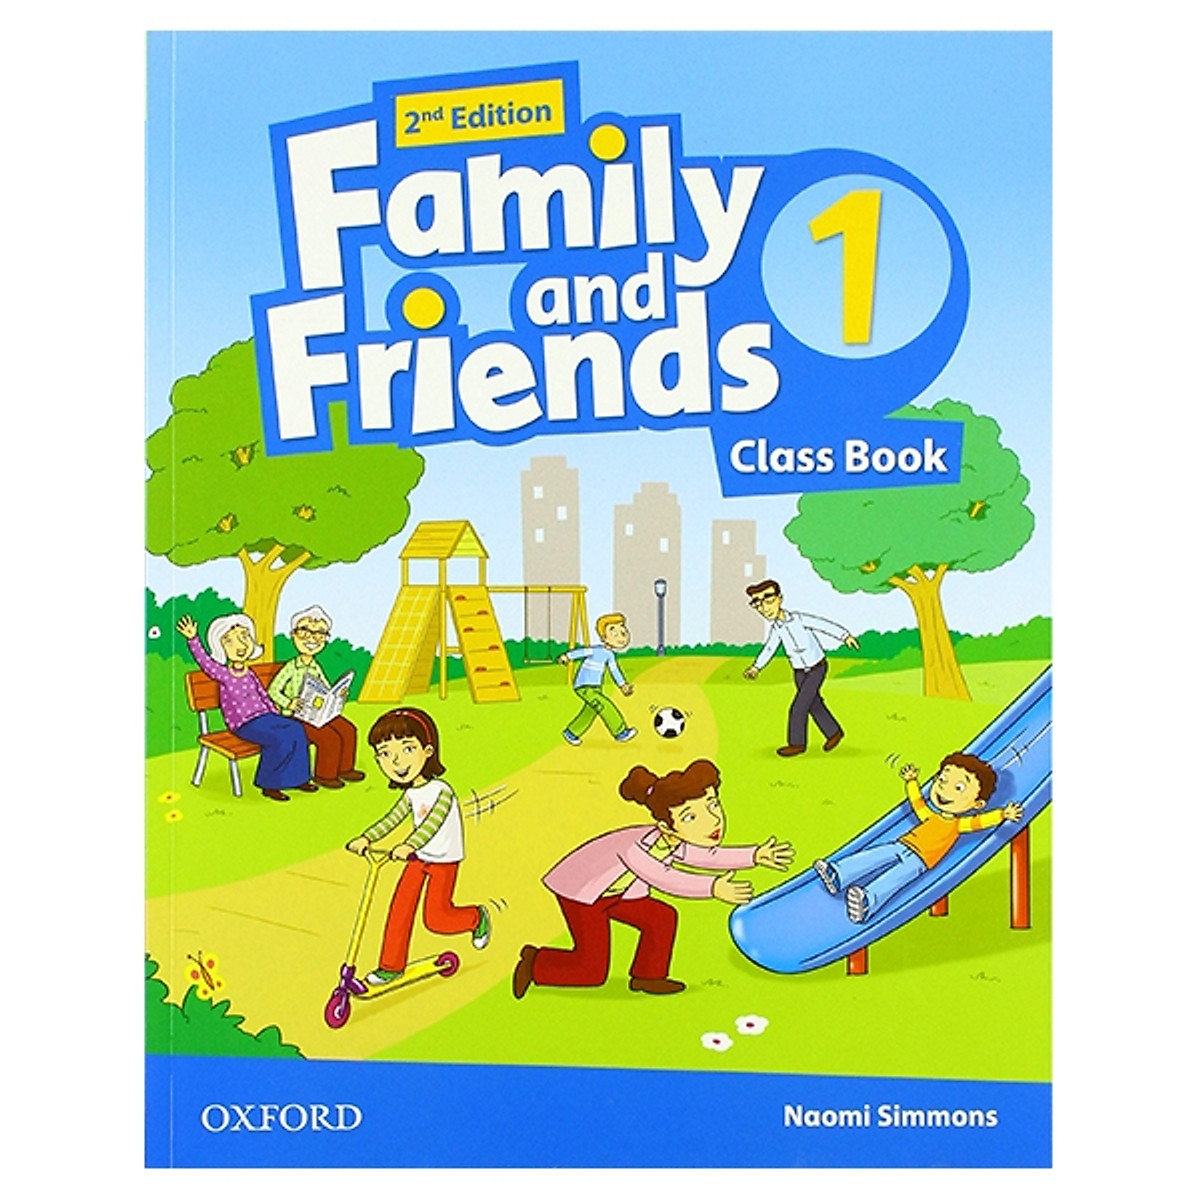 Family and friends 1 class book. Фэмили энд френдс. Фэмили энд френдс 1. Family and friends 1 2. Family and friends 1 unit 12